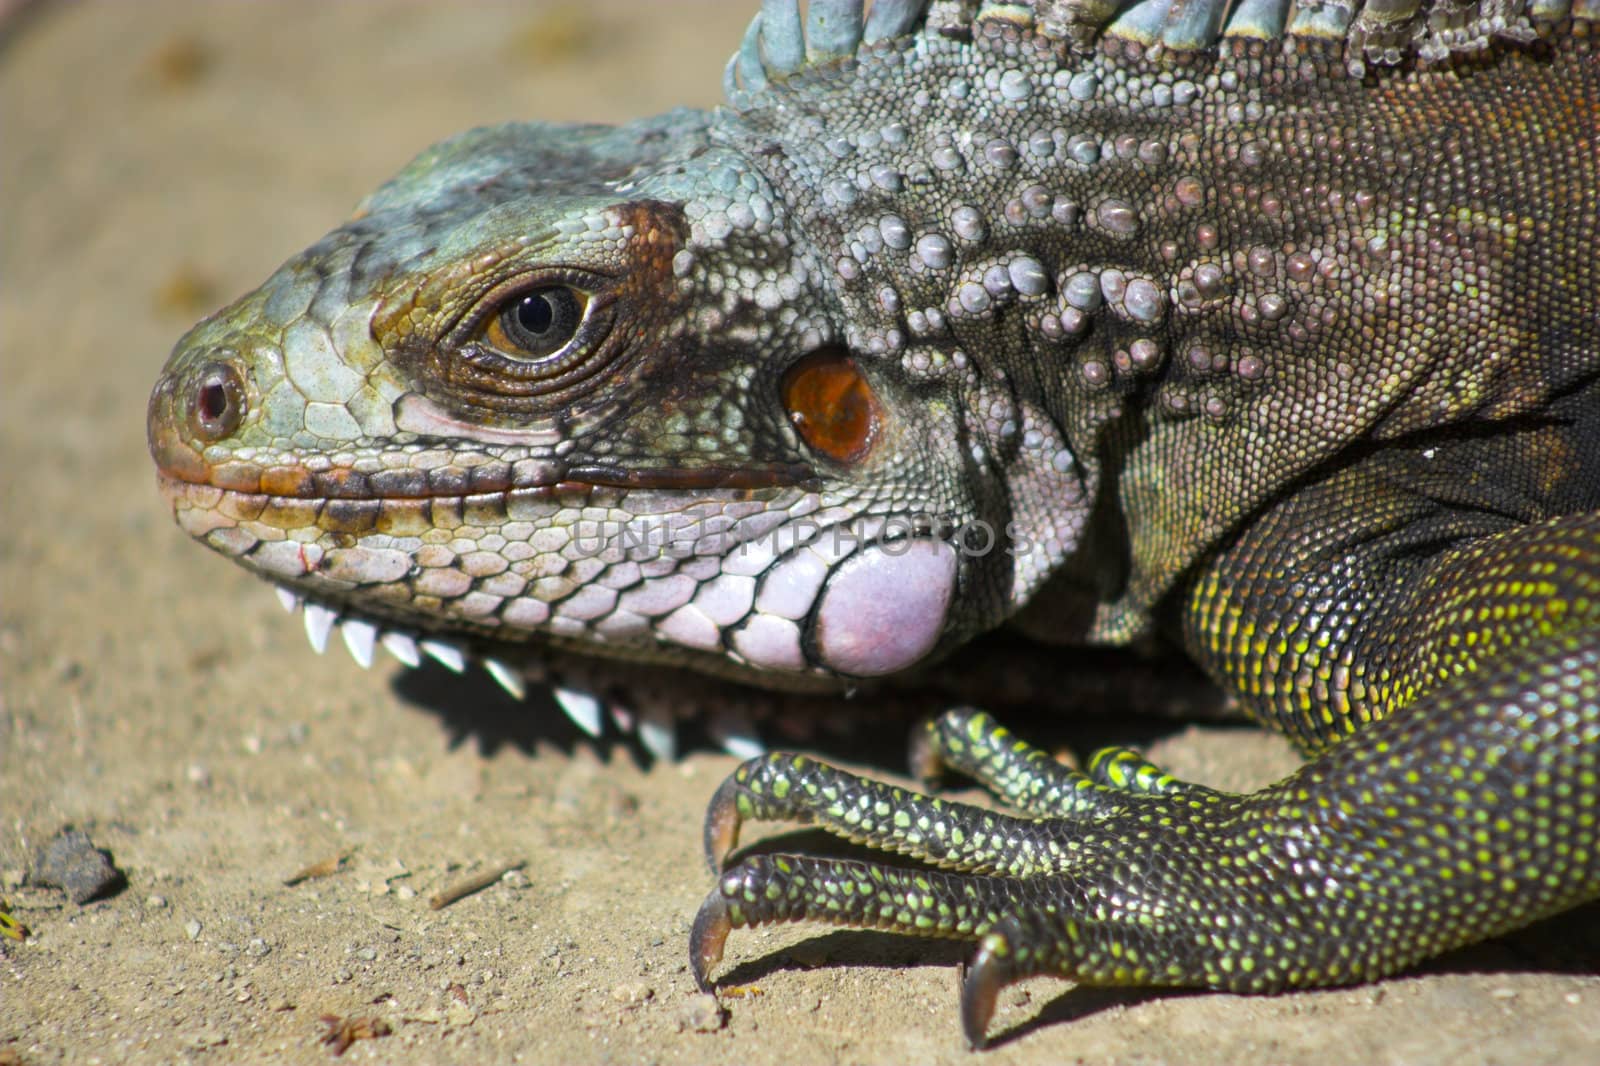 Iguana - portrait of iguana filtered to display all its natural vibrant colors